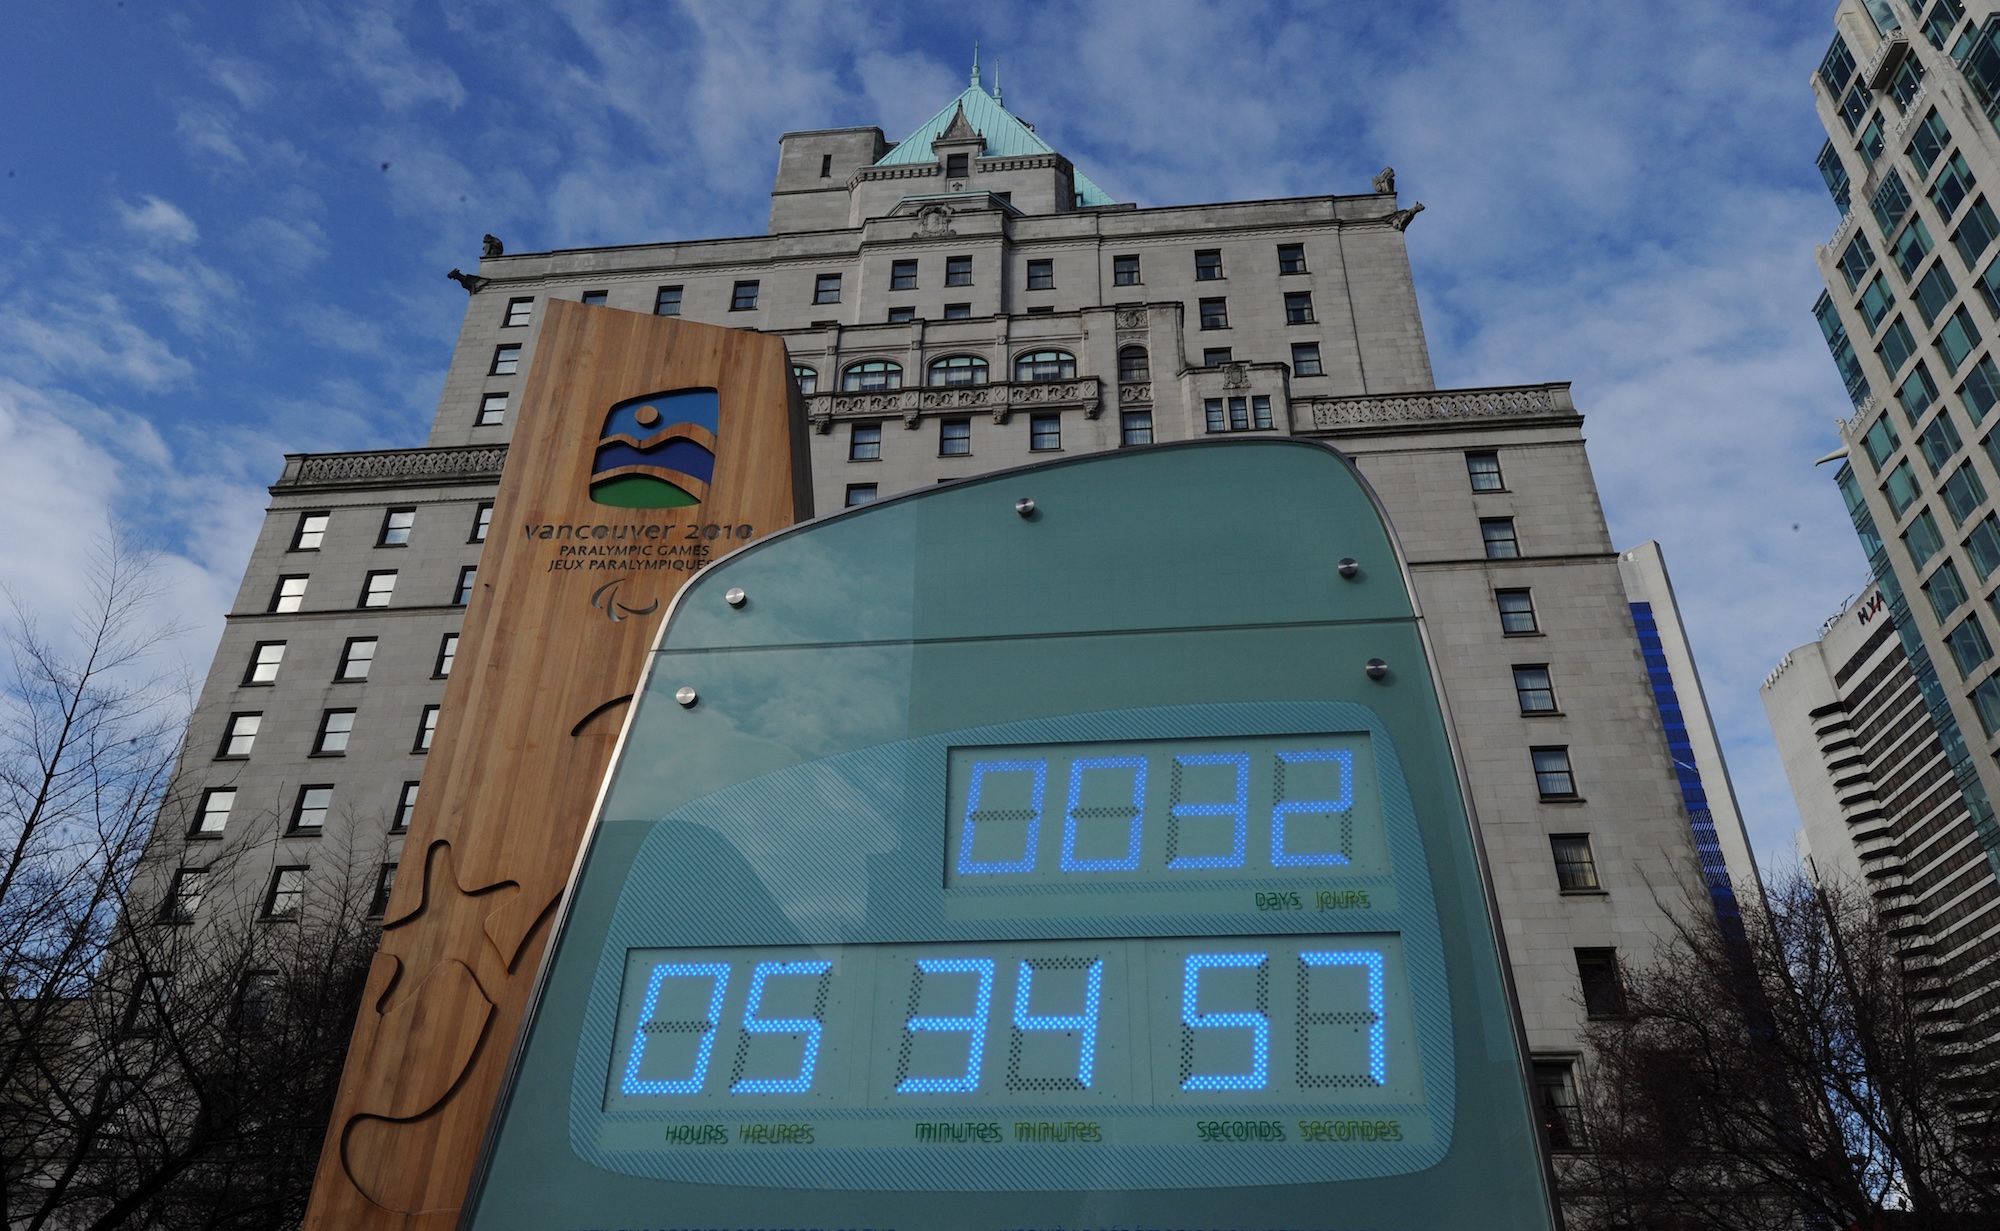 a large green sign with a countdown clock in days, hours, and minutes on a city street